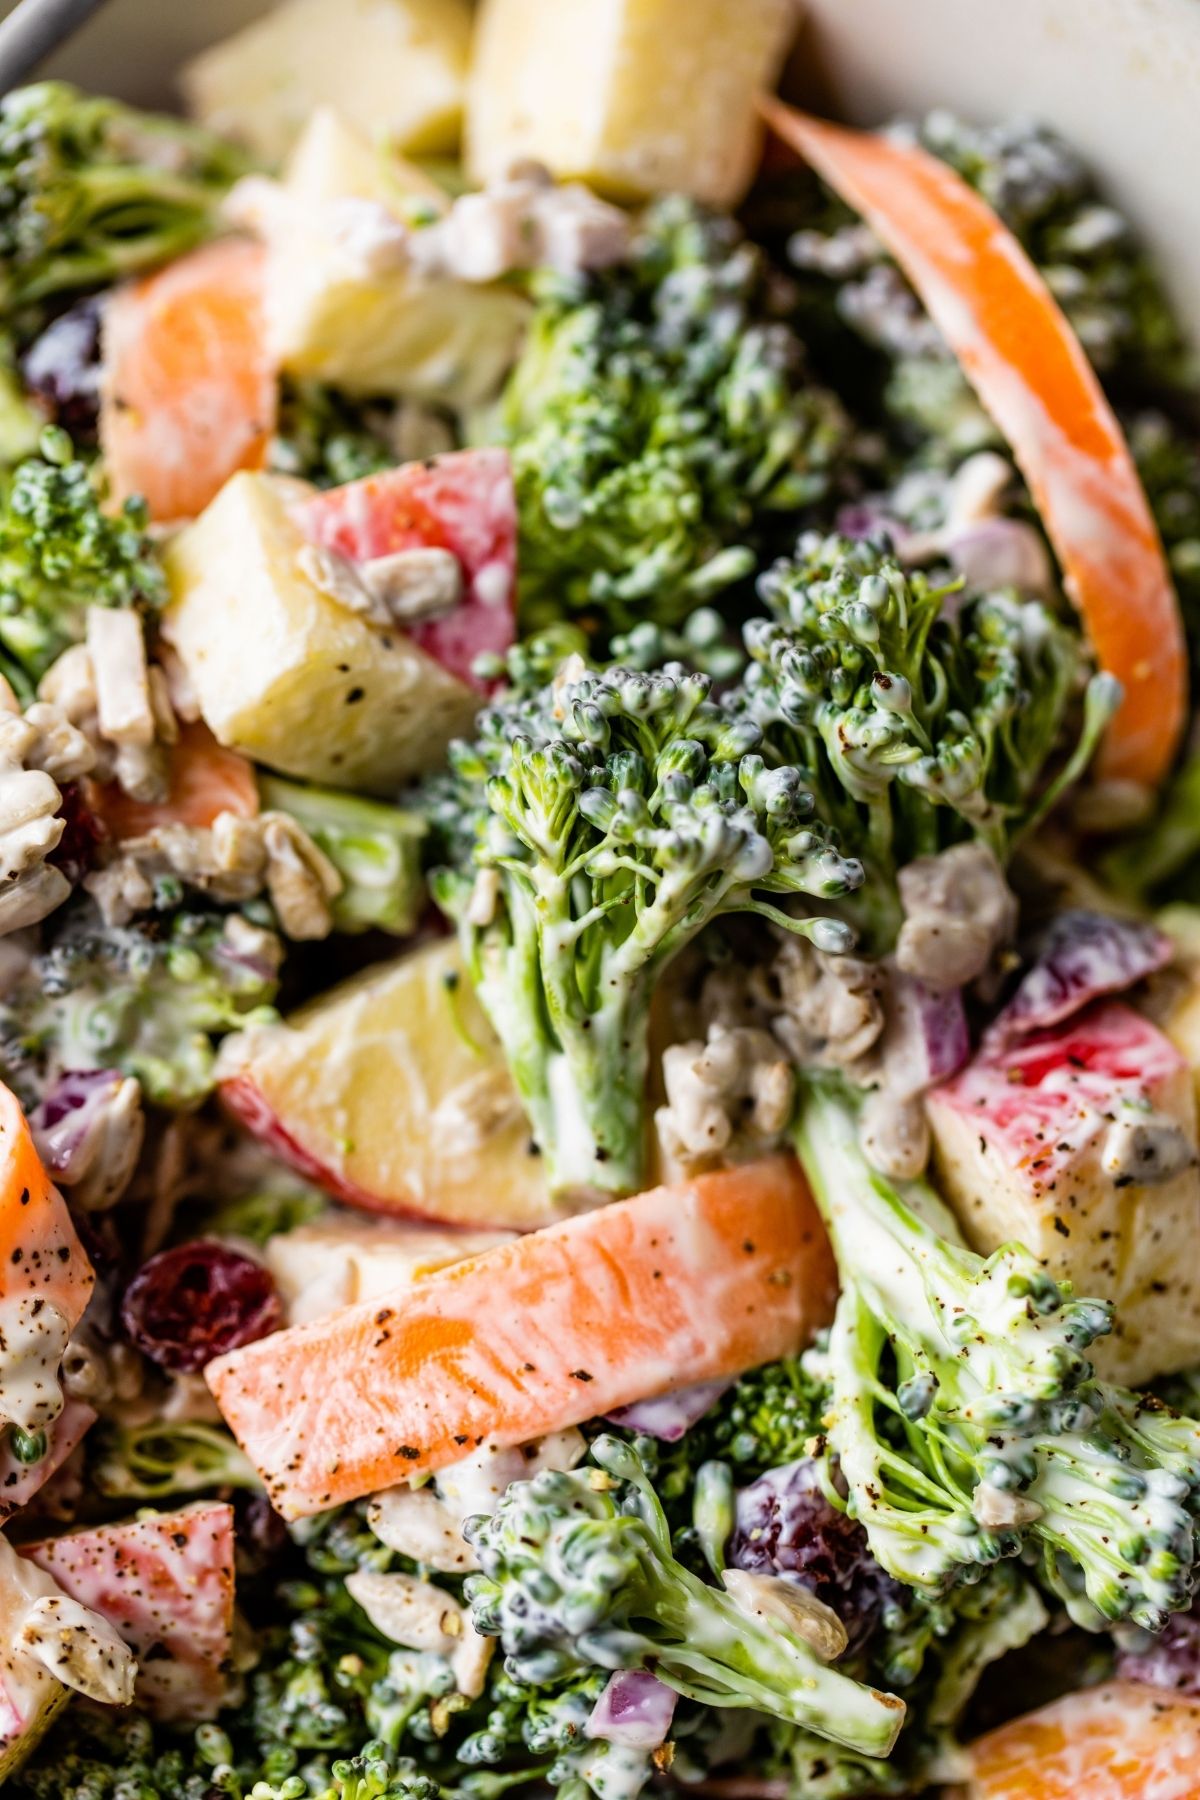 Broccoli Salad with carrots and apples.